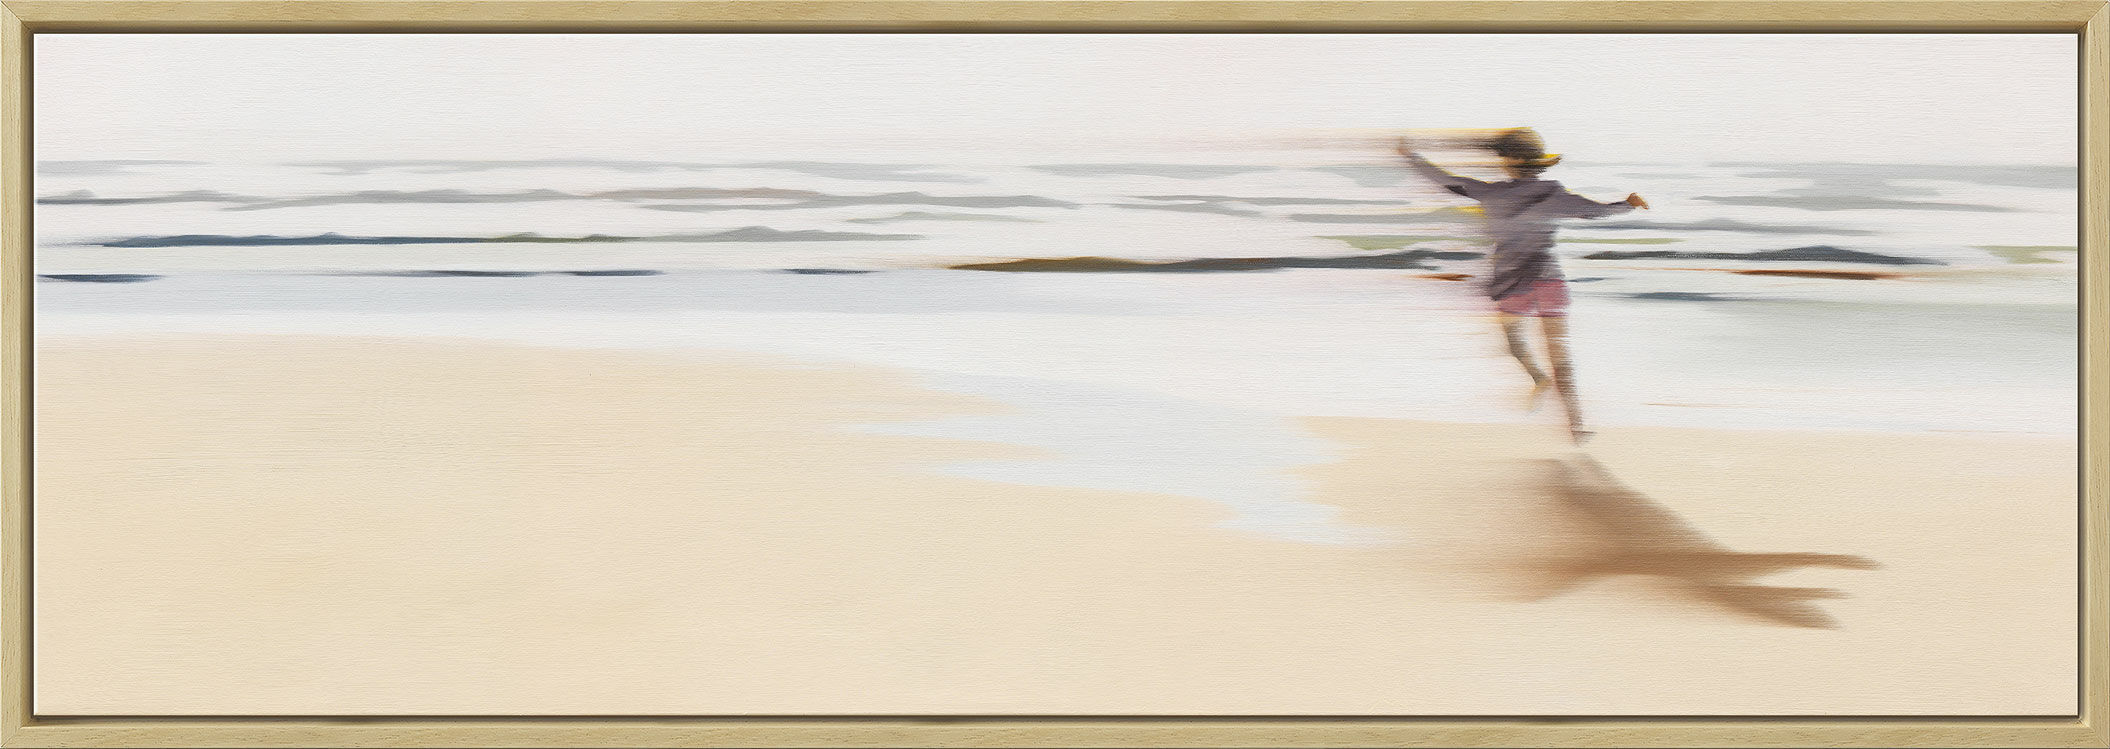 Picture "Barefoot" (2015), framed by Anja Struck